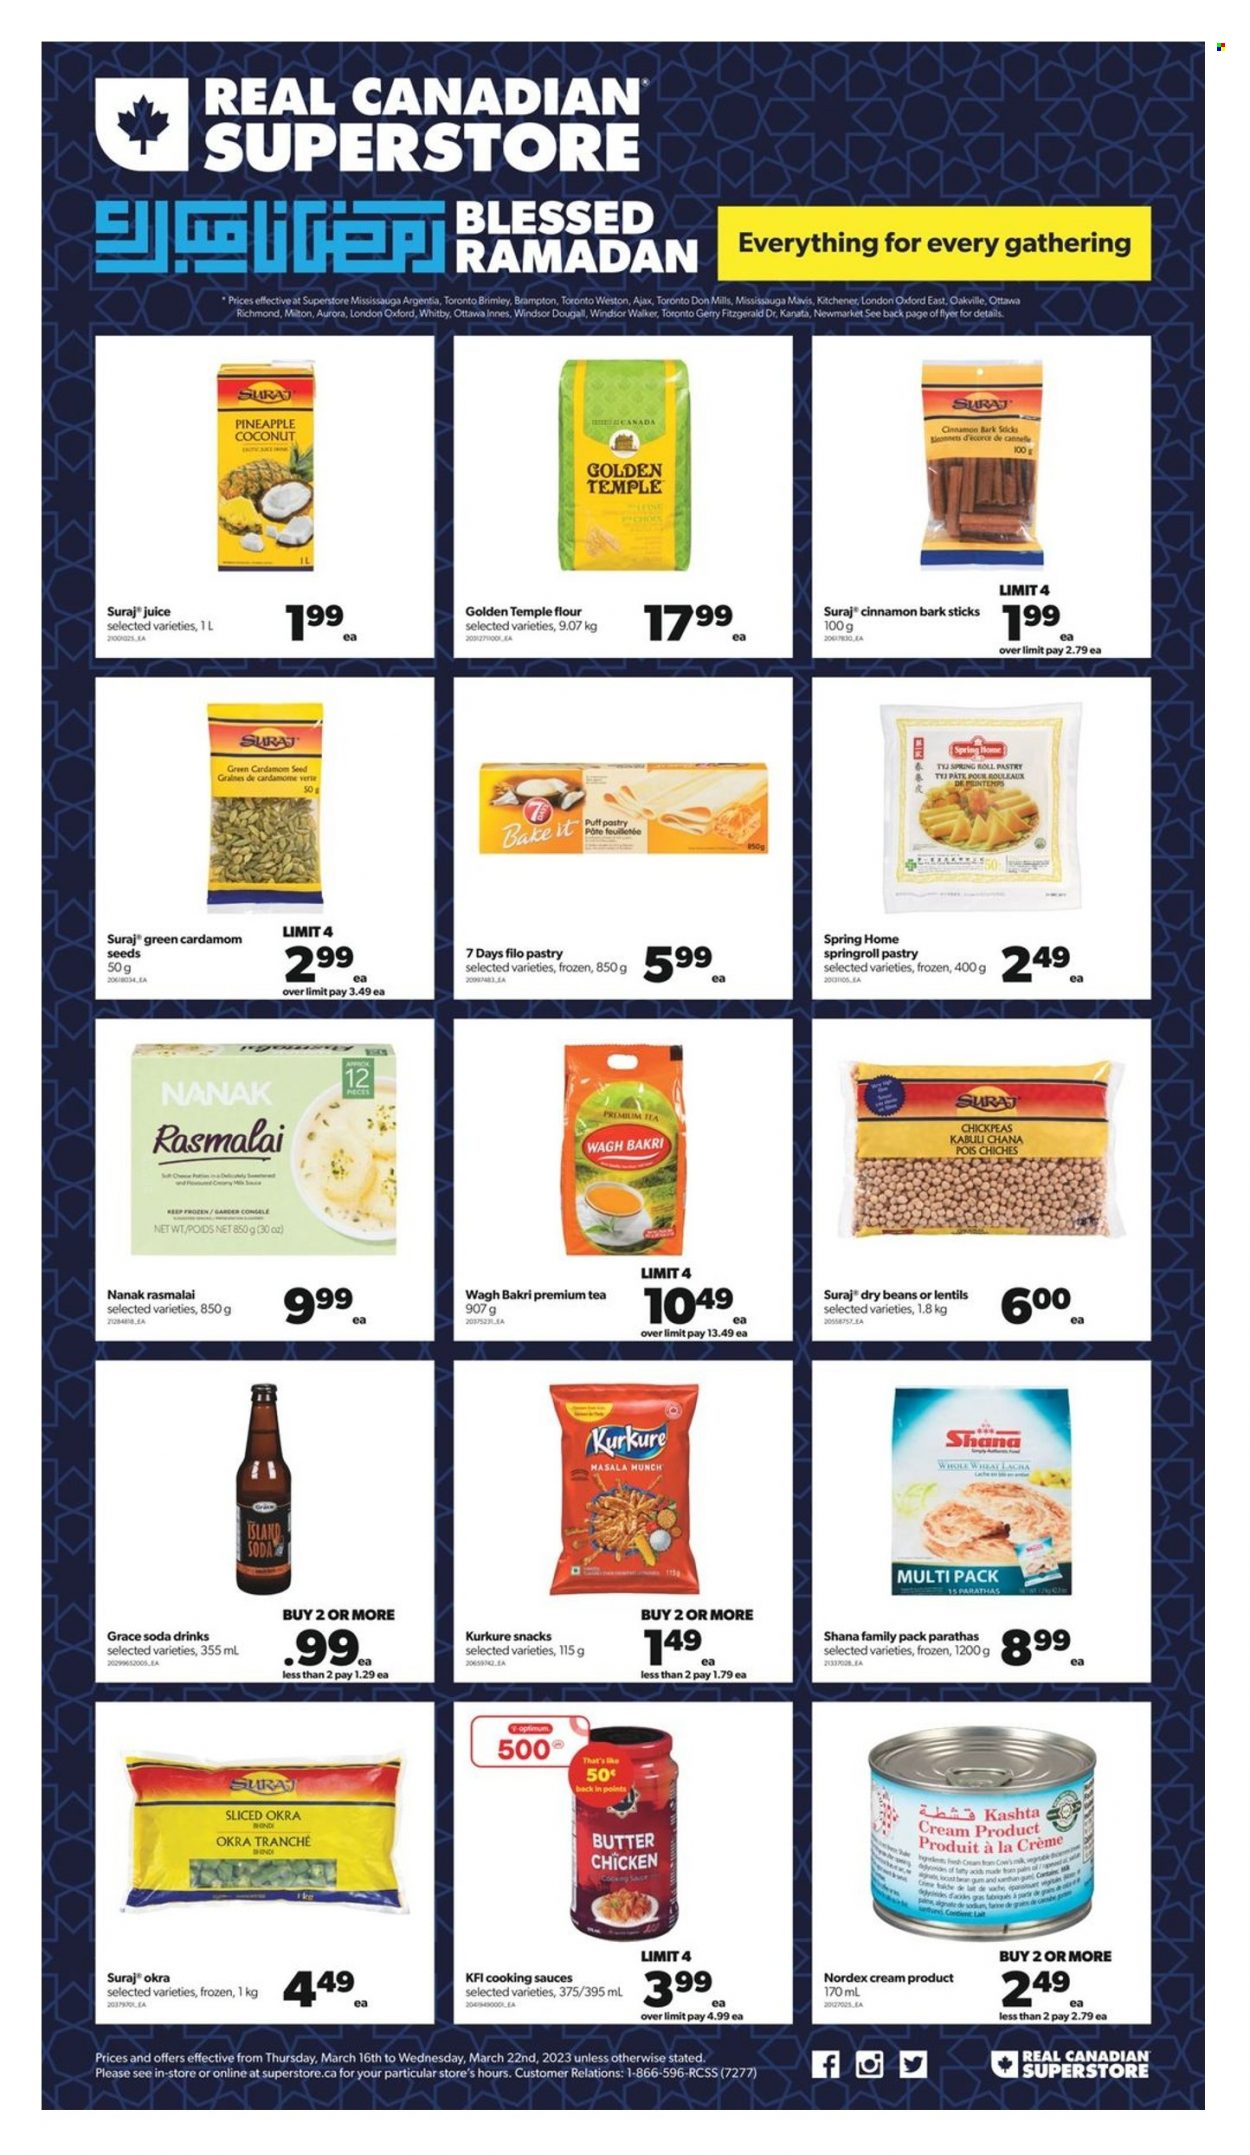 thumbnail - Real Canadian Superstore Flyer - March 16, 2023 - March 22, 2023 - Sales products - beans, okra, pineapple, coconut, filo dough, puff pastry, snack, 7 Days, flour, lentils, chickpeas, dry beans, cinnamon, juice, soda, tea, Ajax, Optimum, plant seeds. Page 1.